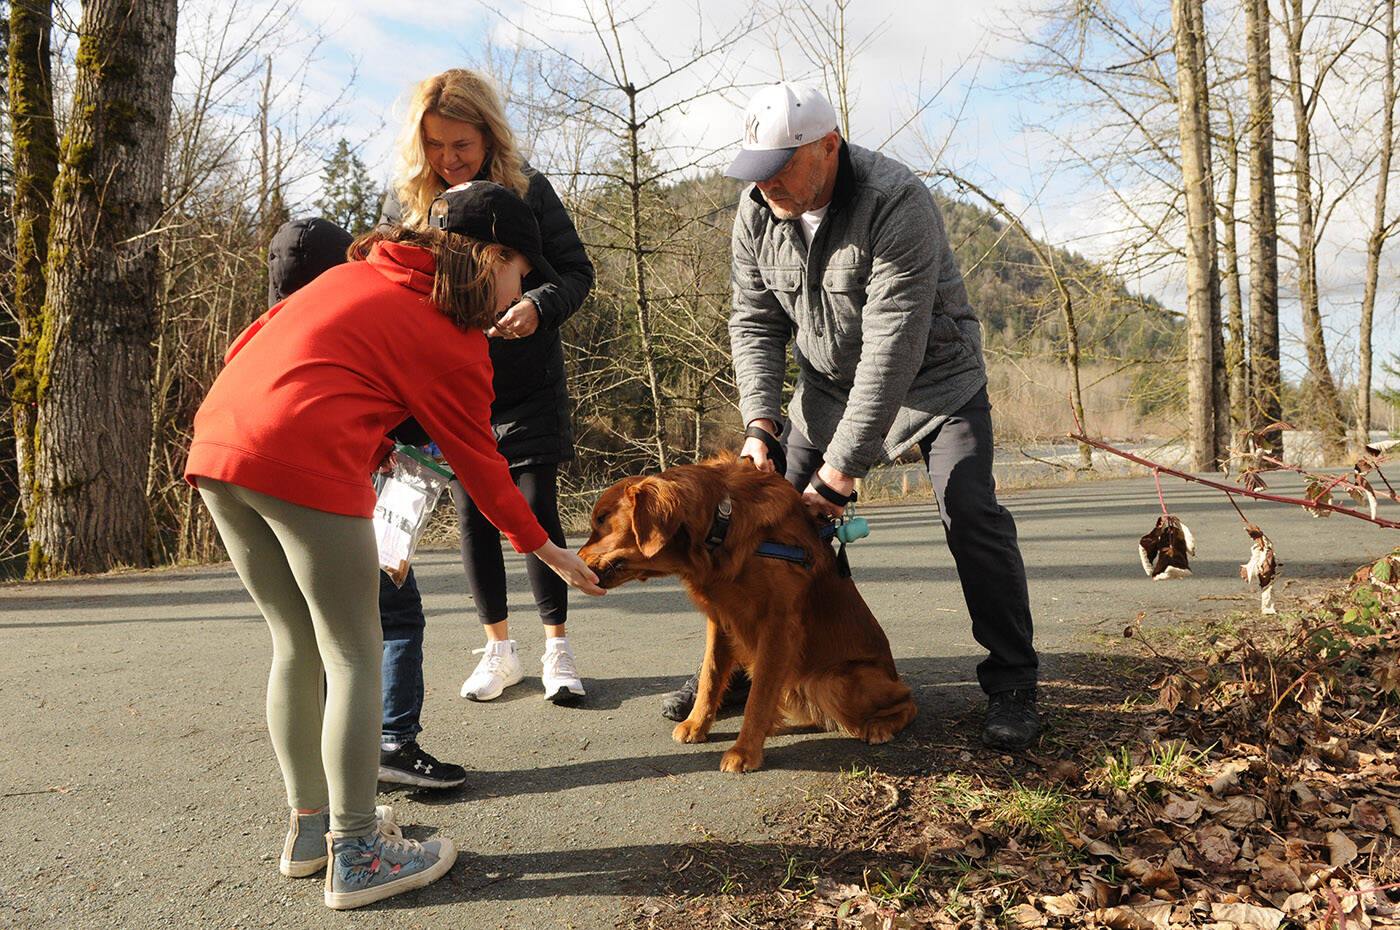 Jade Pennock gives a dog a treat near Vedder Park during Watson Elementarys Kindness Project on Wednesday, March 15, 2023. (Jenna Hauck/ Chilliwack Progress)